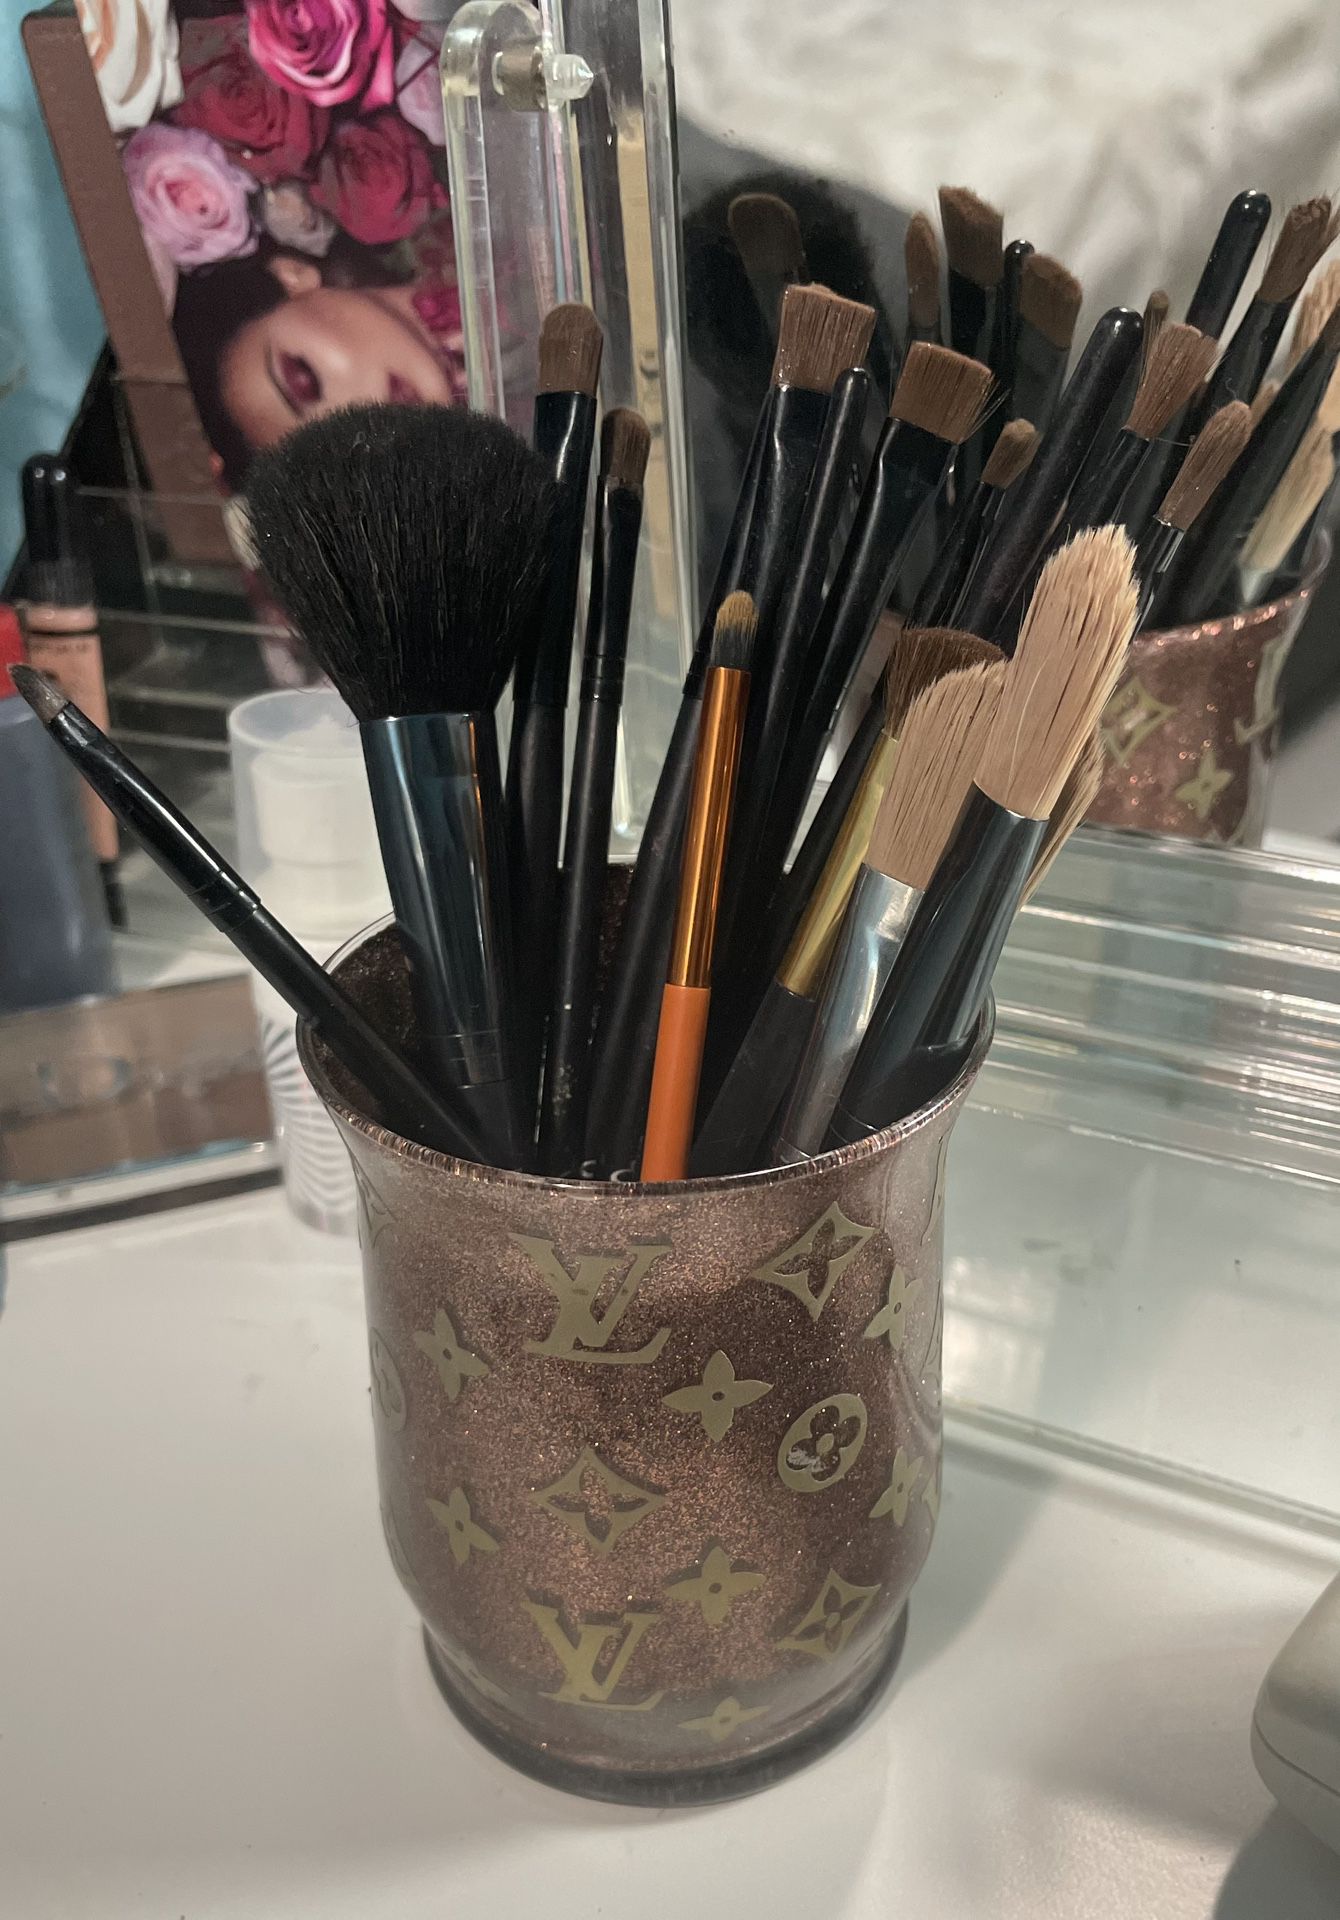 Makeup Brush Holder Free Brushes $12 for Sale in San Antonio, TX - OfferUp